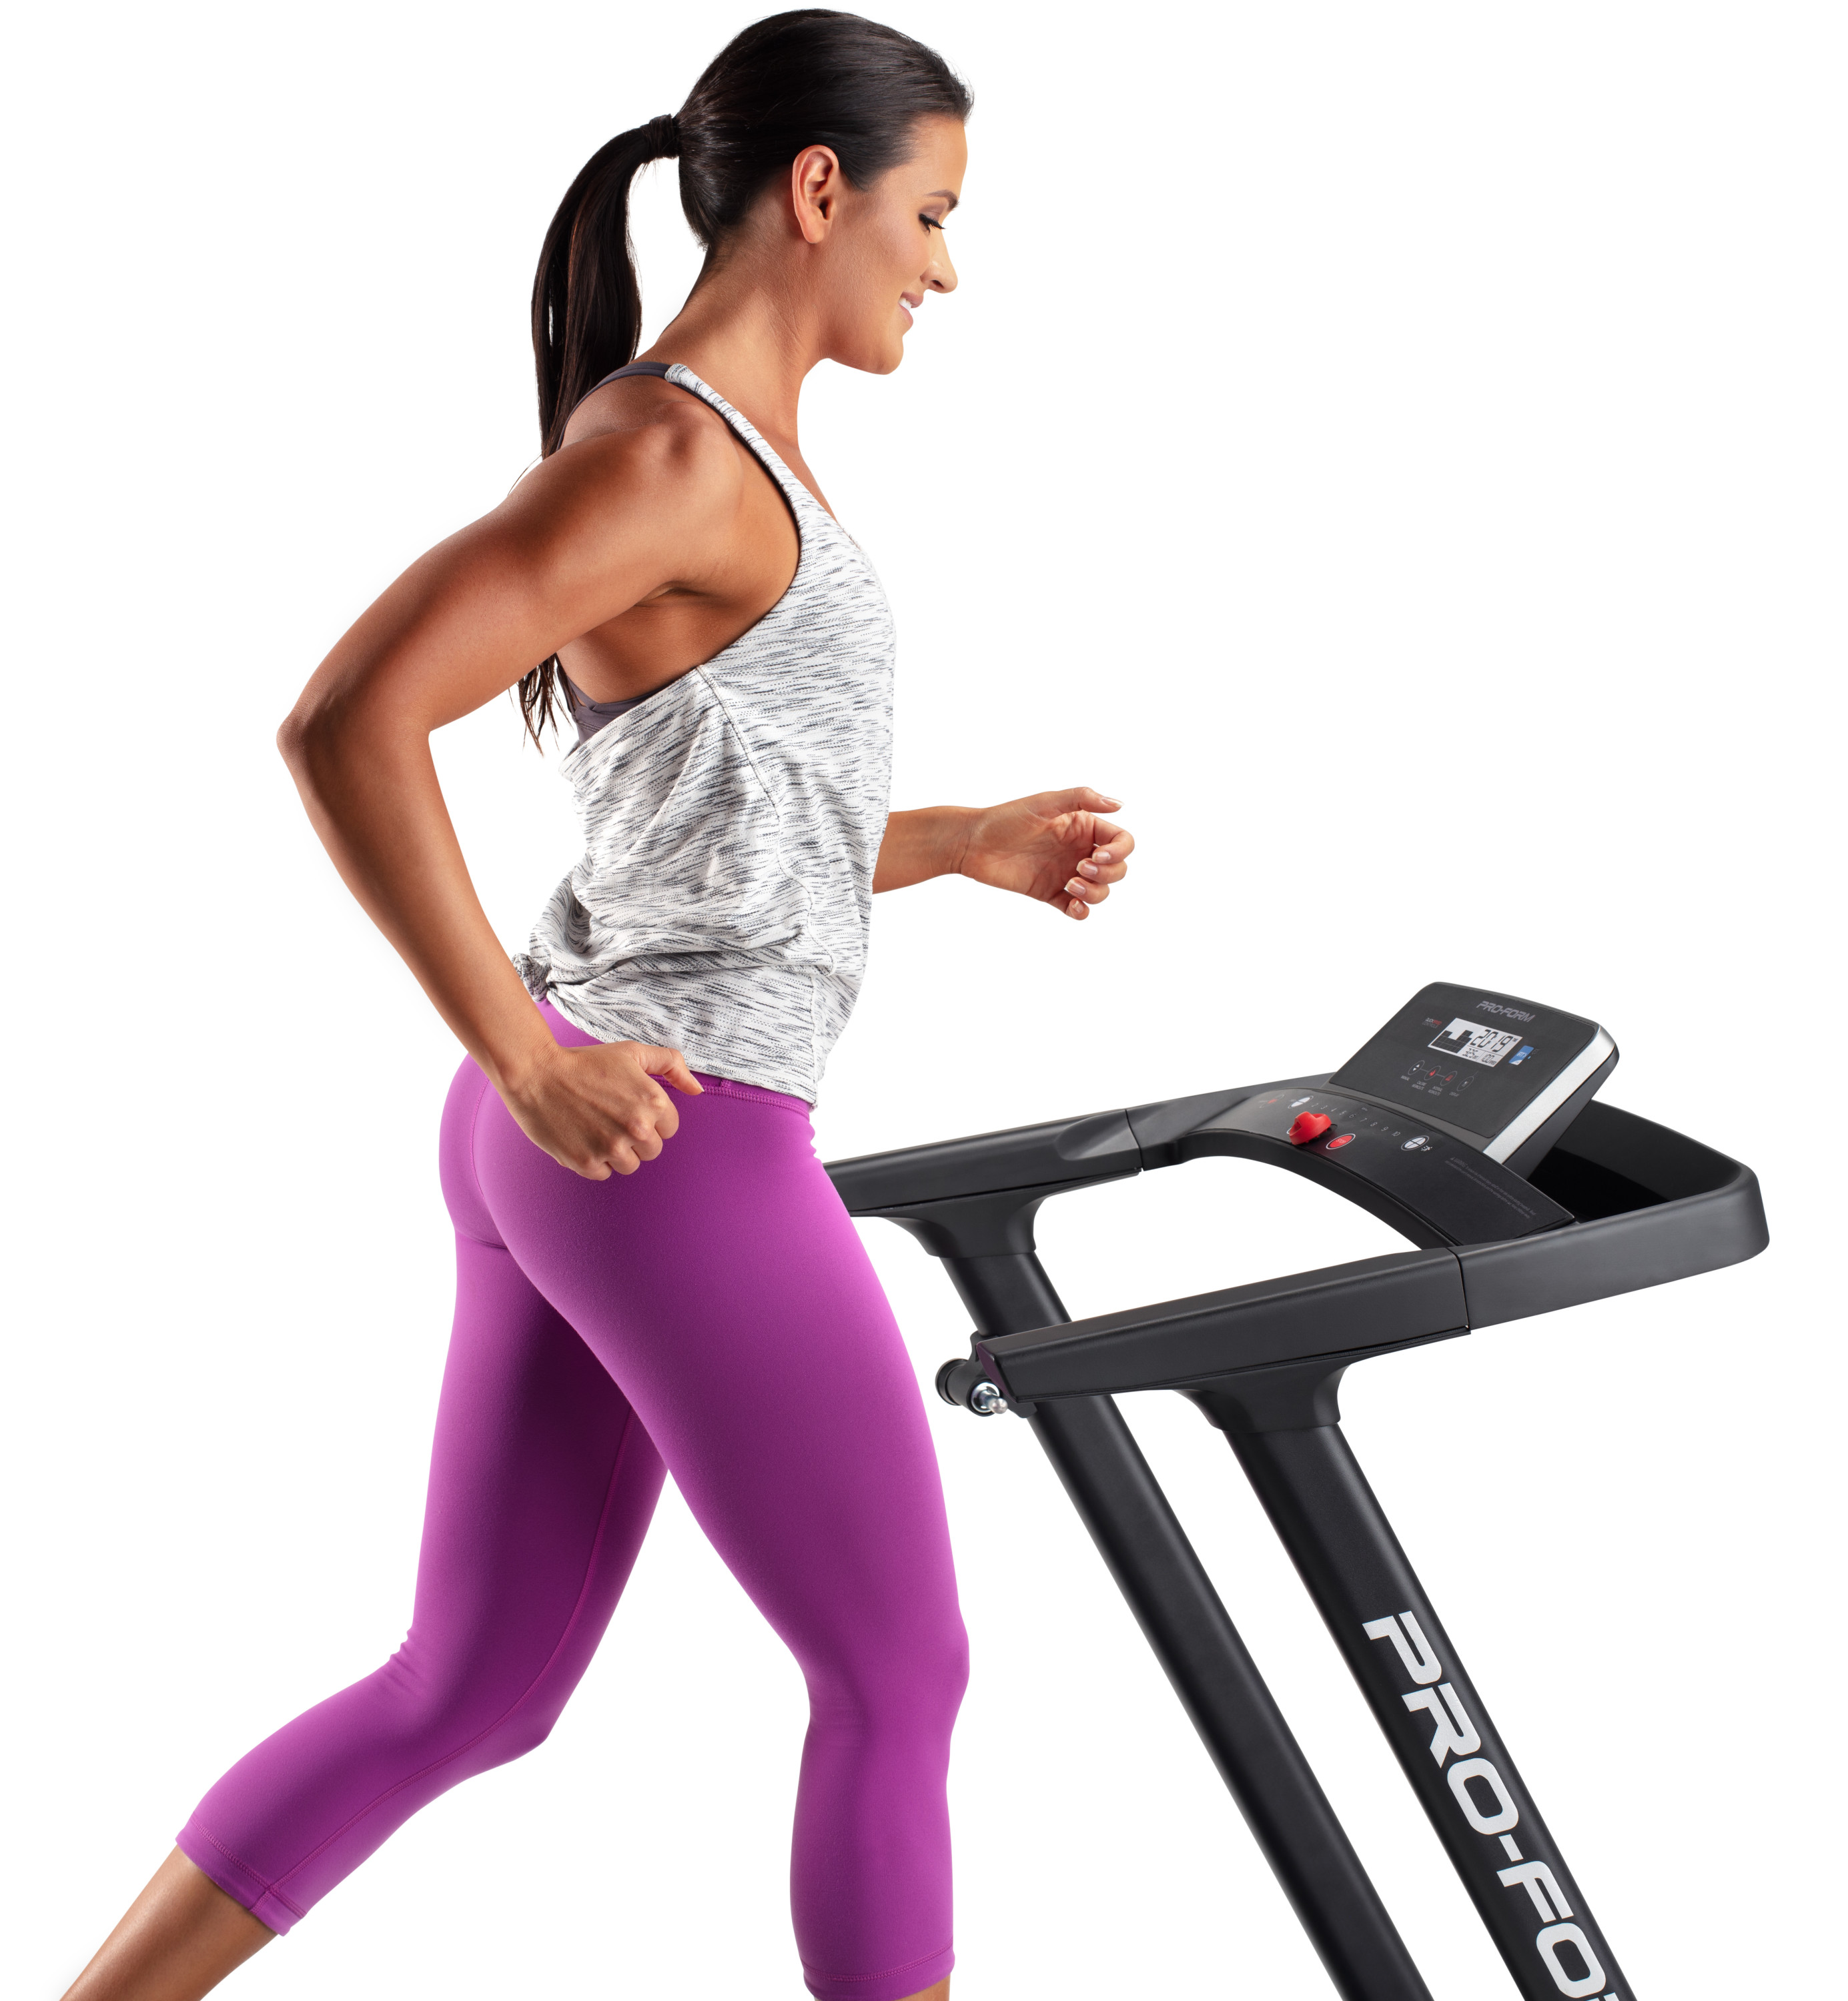 ProForm Cadence WLT Folding Treadmill with Reflex Deck for Walking and Jogging, iFit Bluetooth Enabled - image 22 of 31